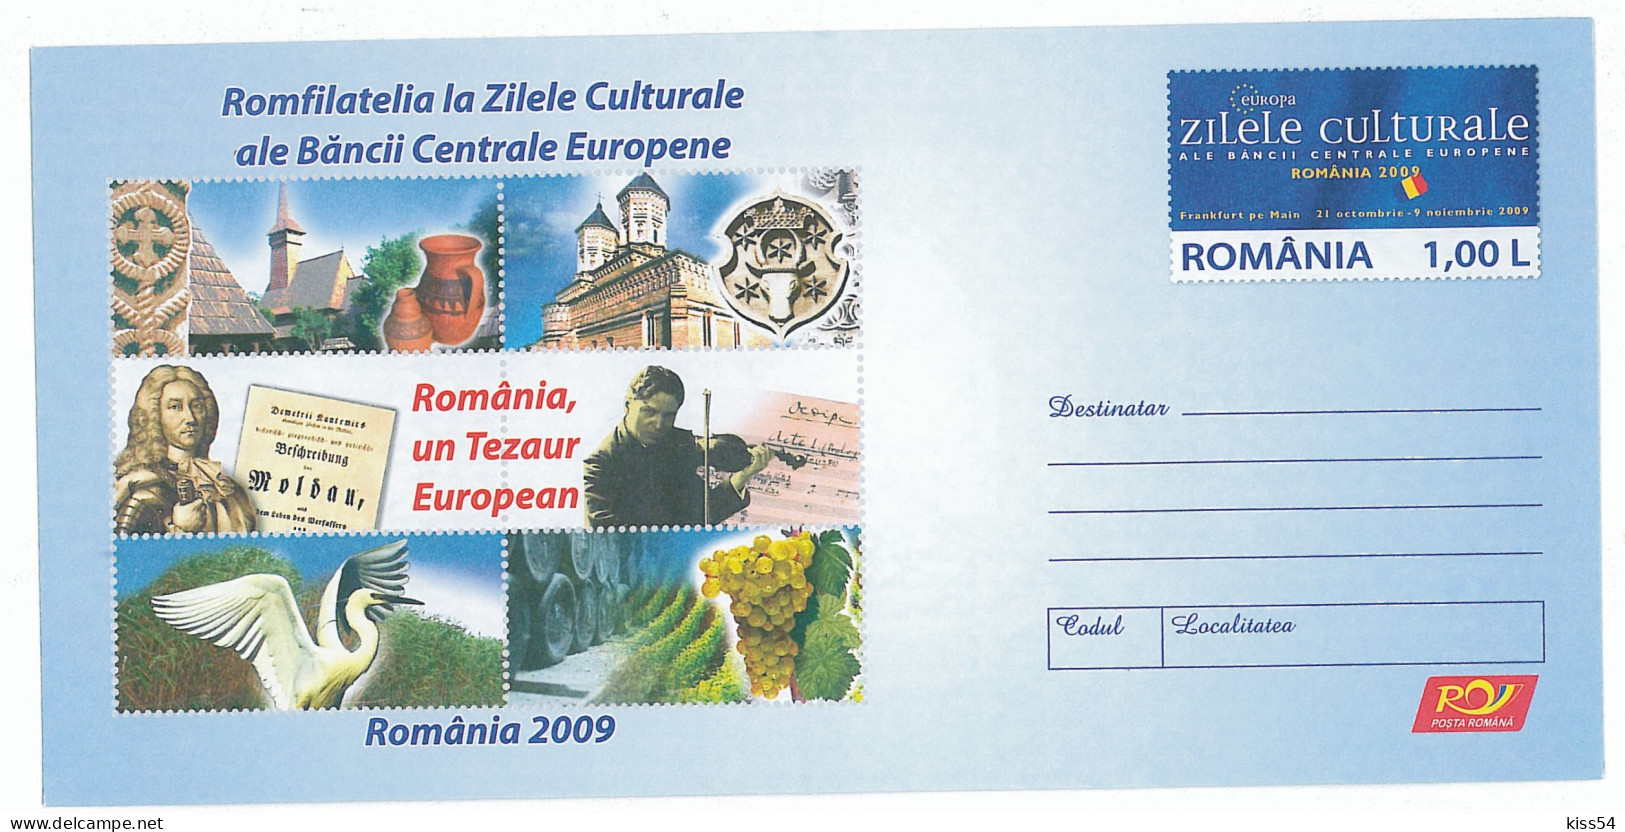 IP 2009 - 38 Frankfurt, Cultural Days Of The European Central Bank, Romania - Stationery - Unused - 2009 - Postal Stationery